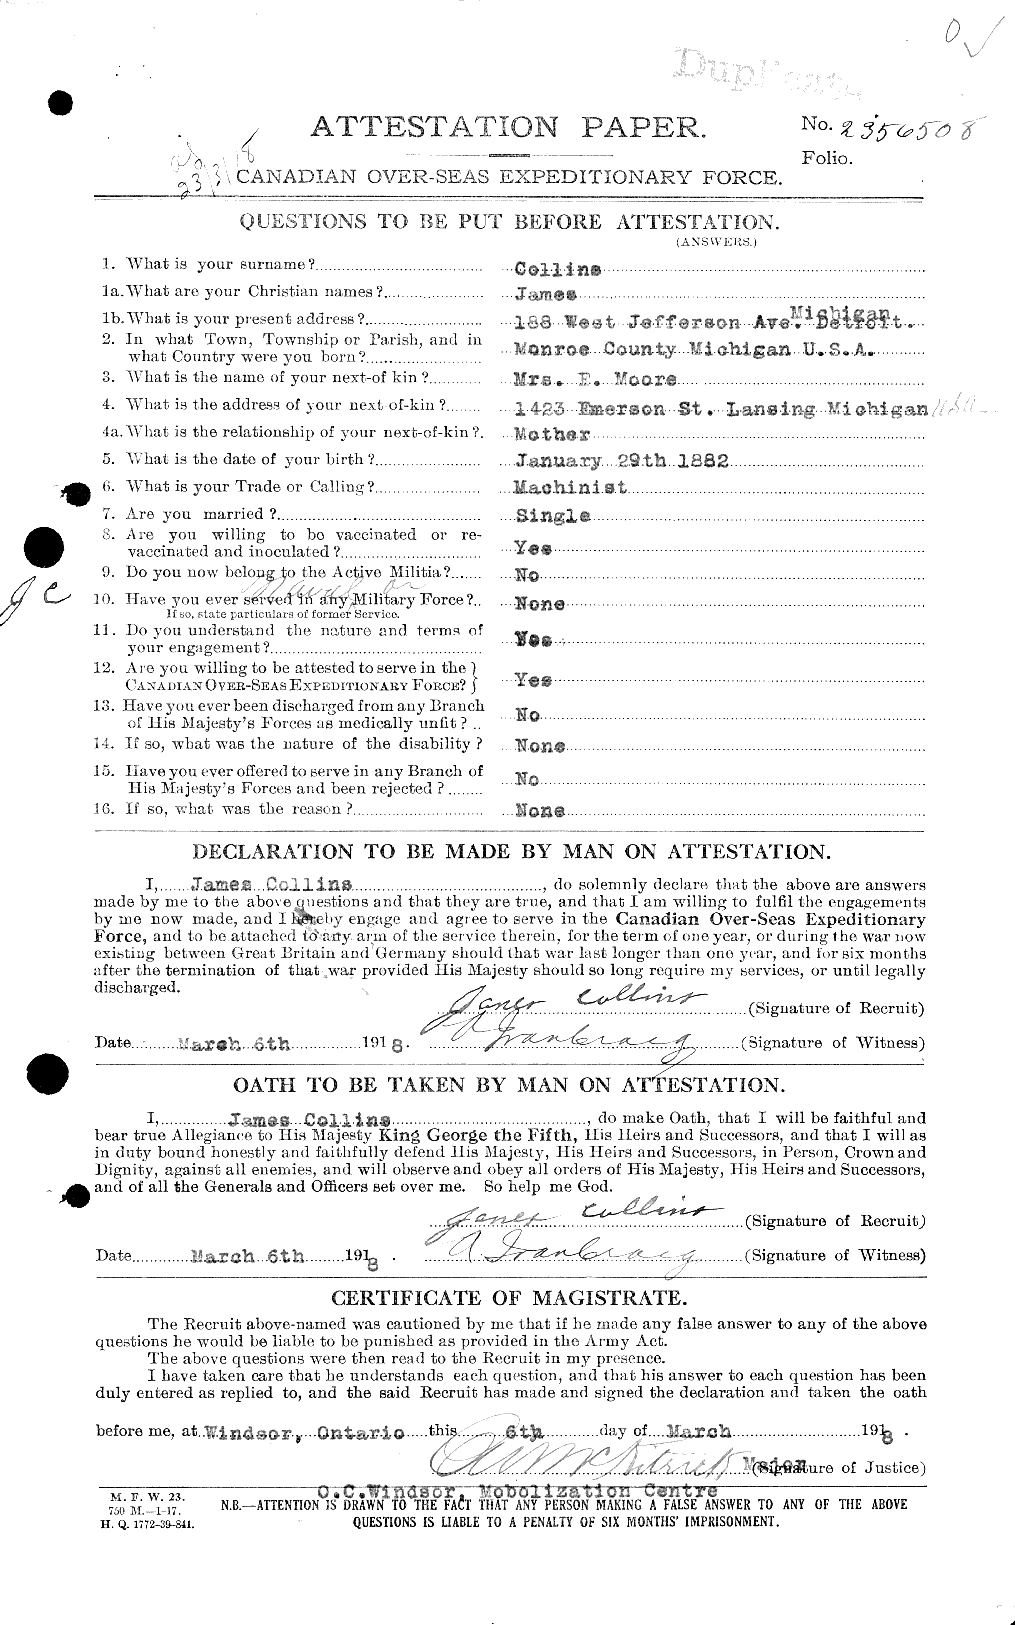 Personnel Records of the First World War - CEF 037920a